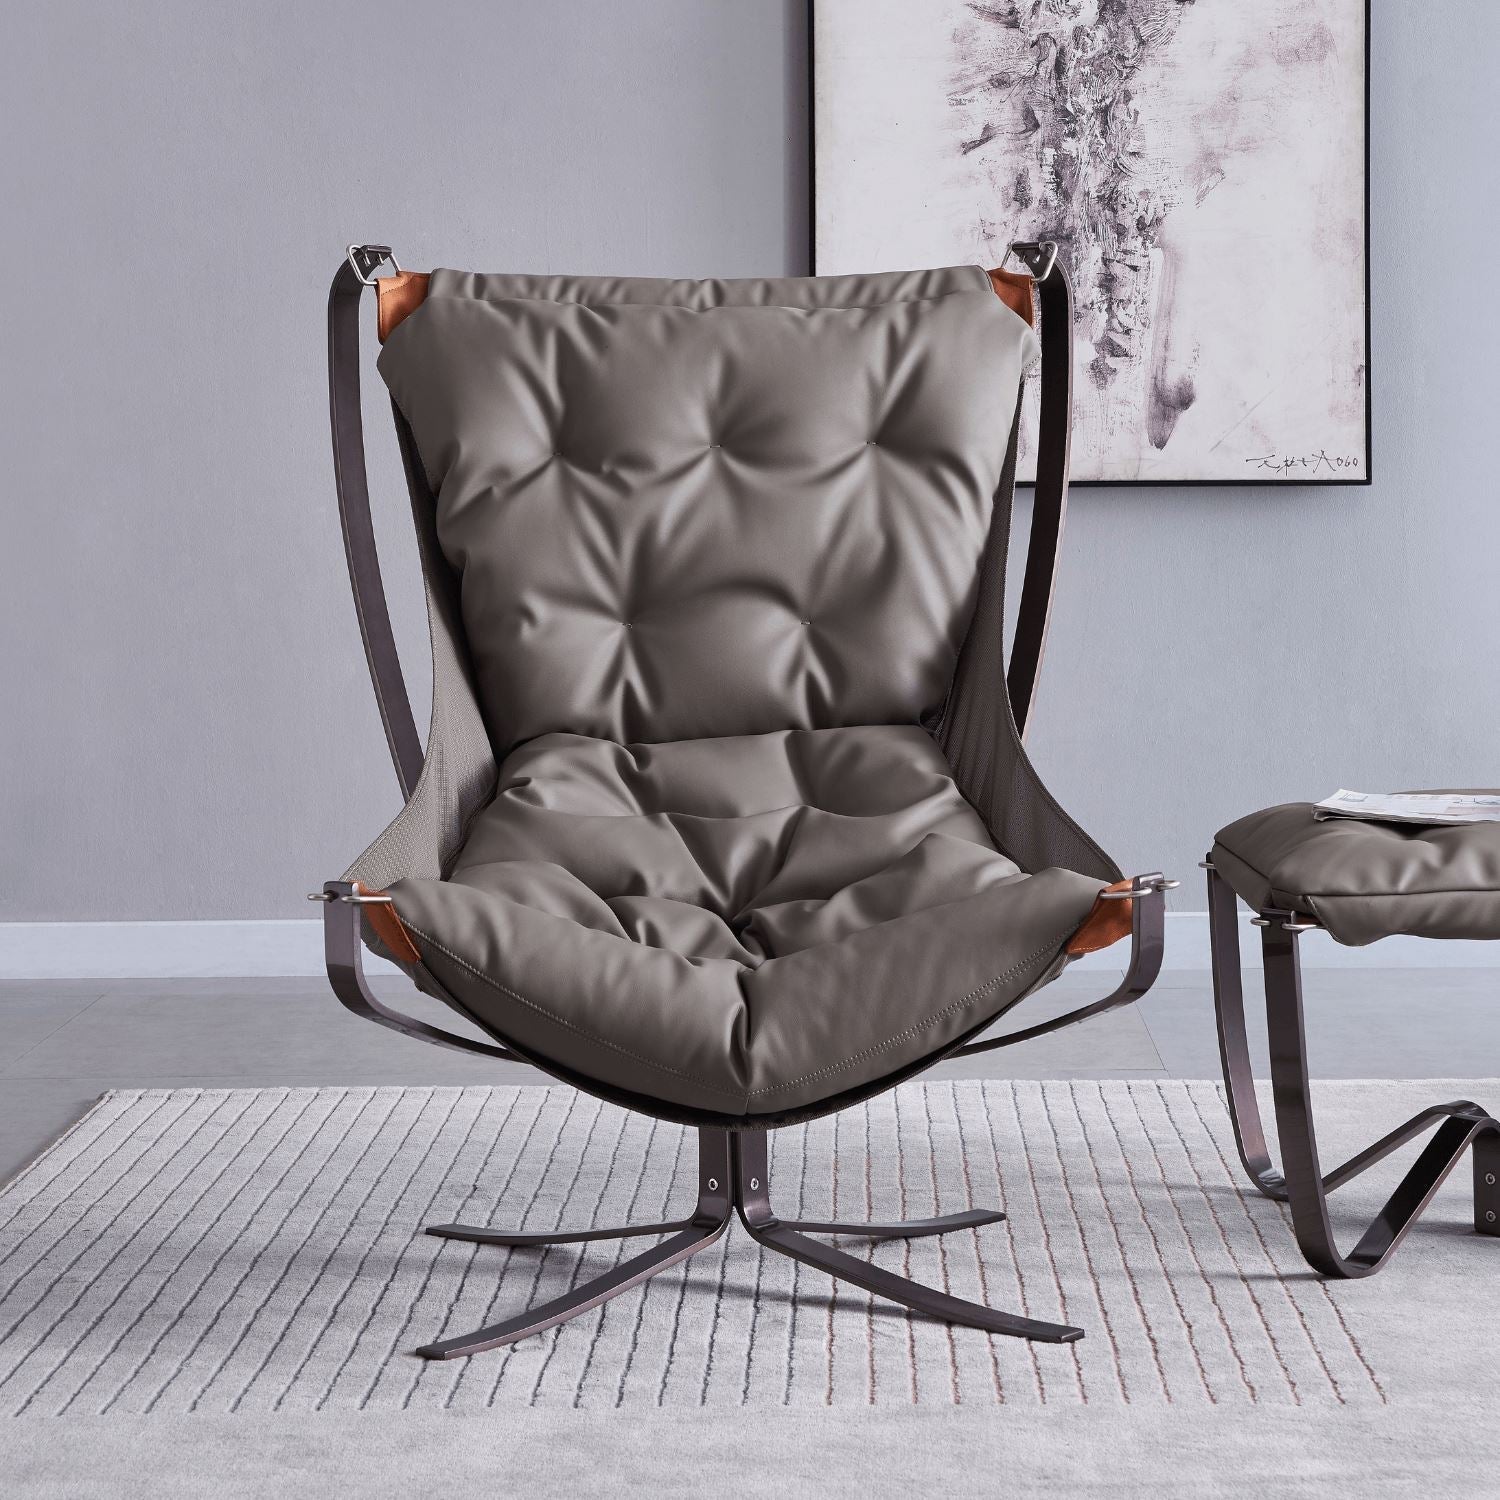 Rilasso Accent Chair With Ottoman - Valyou 